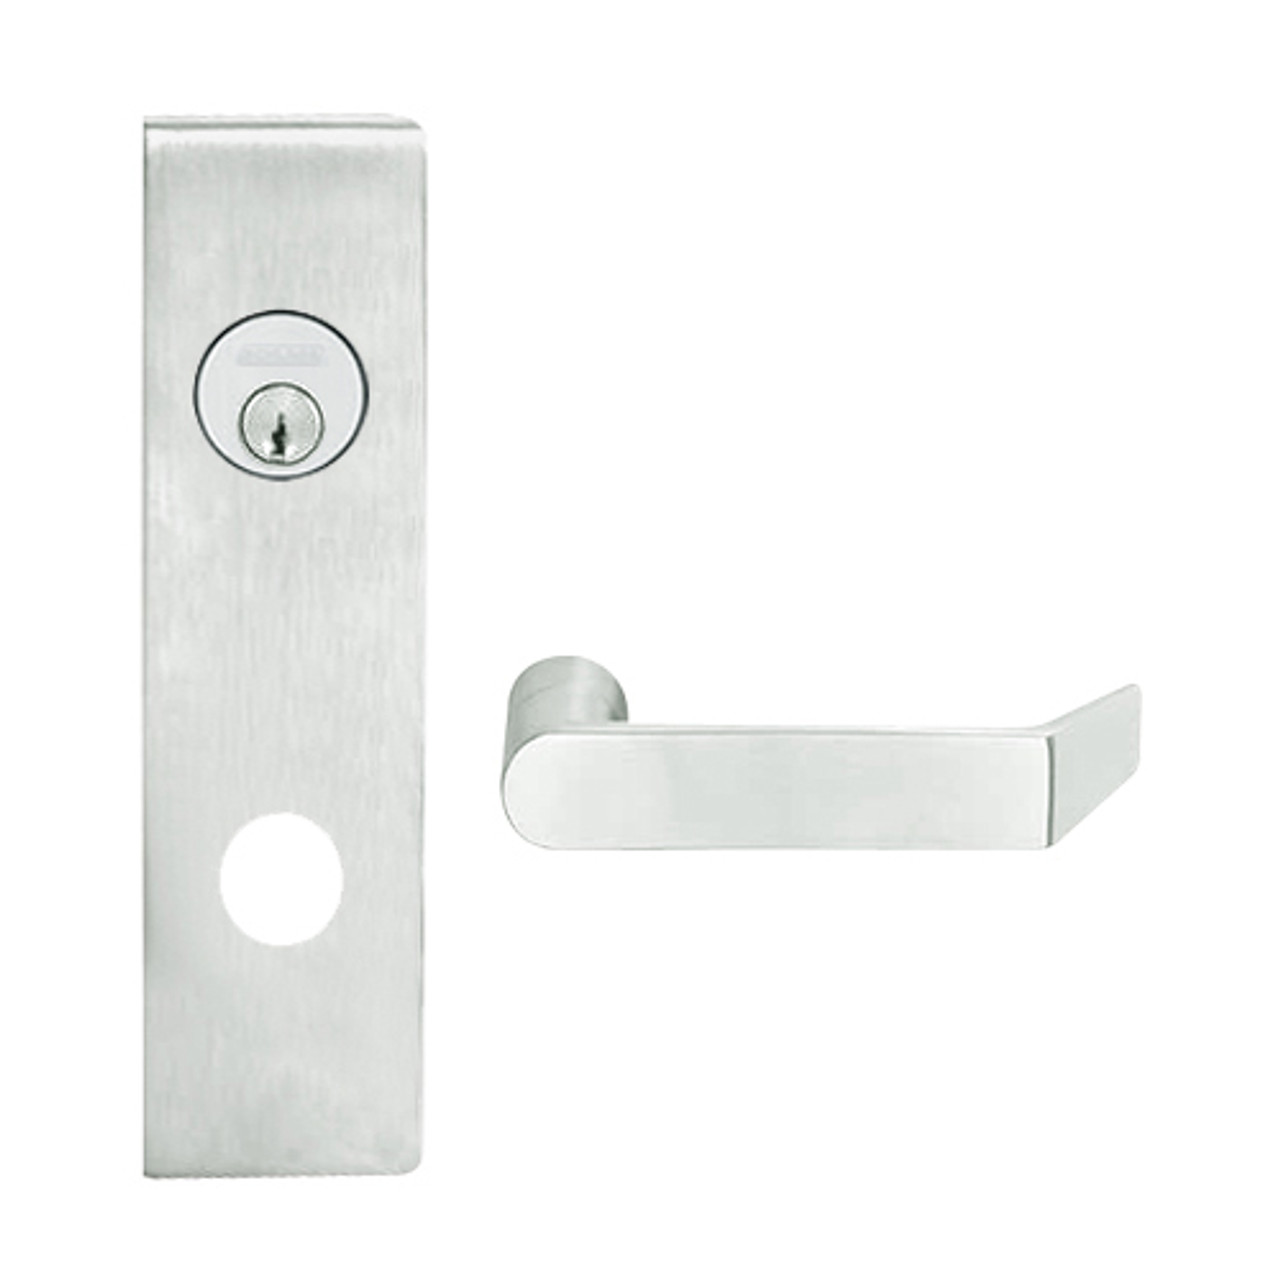 L9026P-06N-619 Schlage L Series Exit Lock with Cylinder Commercial Mortise Lock with 06 Cast Lever Design in Satin Nickel